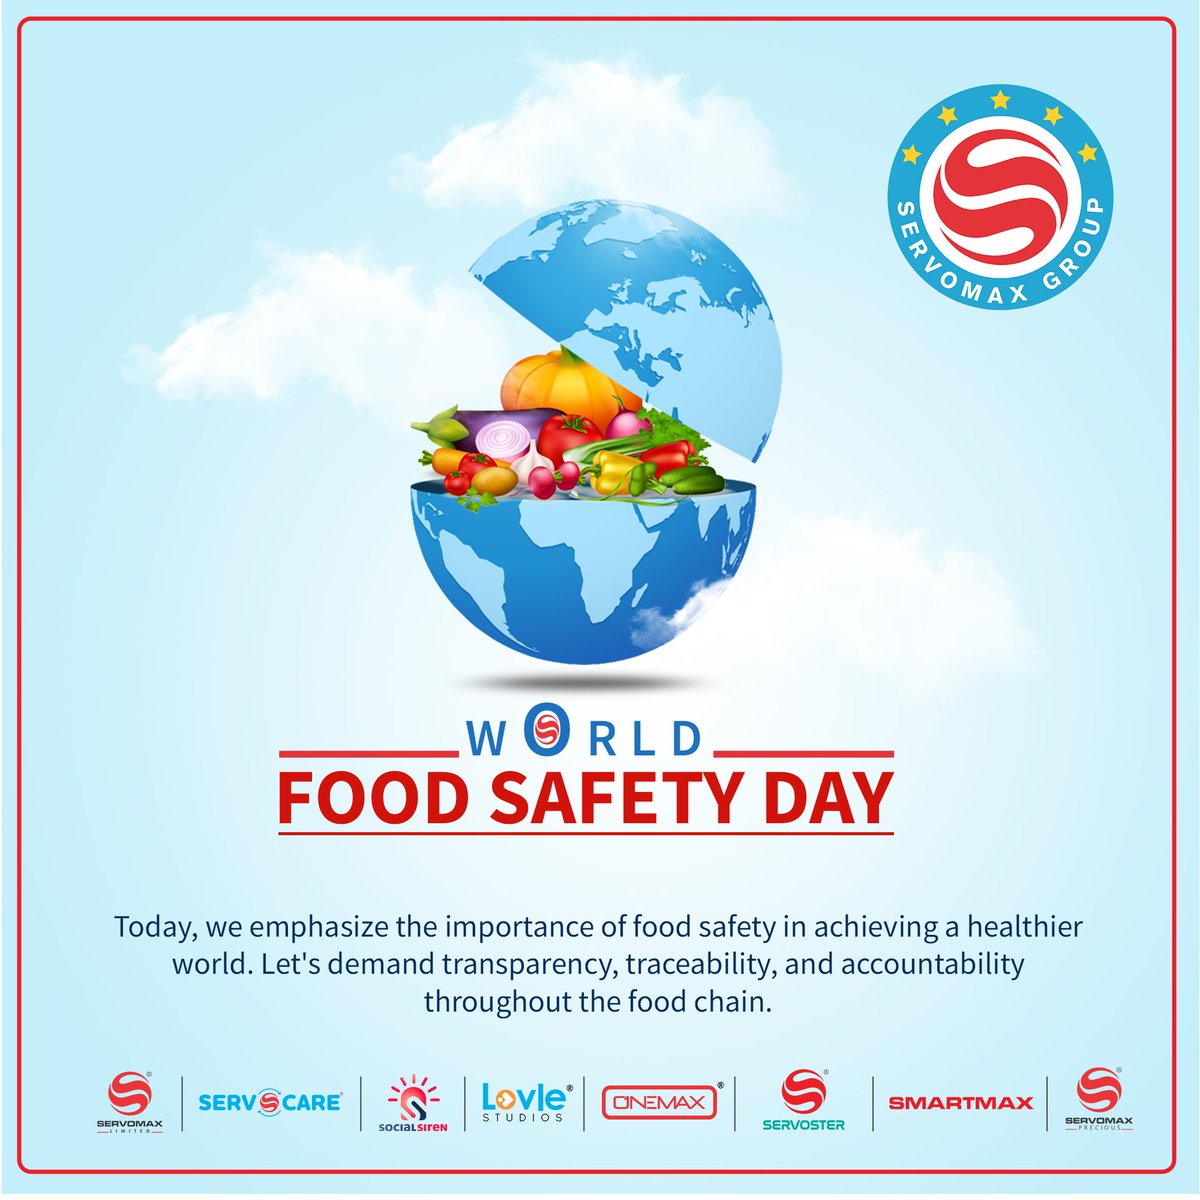 Today, we emphasize the importance of food safety in achieving a healthier world.  World Food Safety Day!

#WorldFoodSafetyDay #WorldFoodSafetyDay2023 #विश्व_खाद्य_सुरक्षा_दिवस #FoodStandardsSaveLives #FoodSafety #SafeFood #Nutrition #HealthyLiving #FoodSecurity

#SERVOCARE